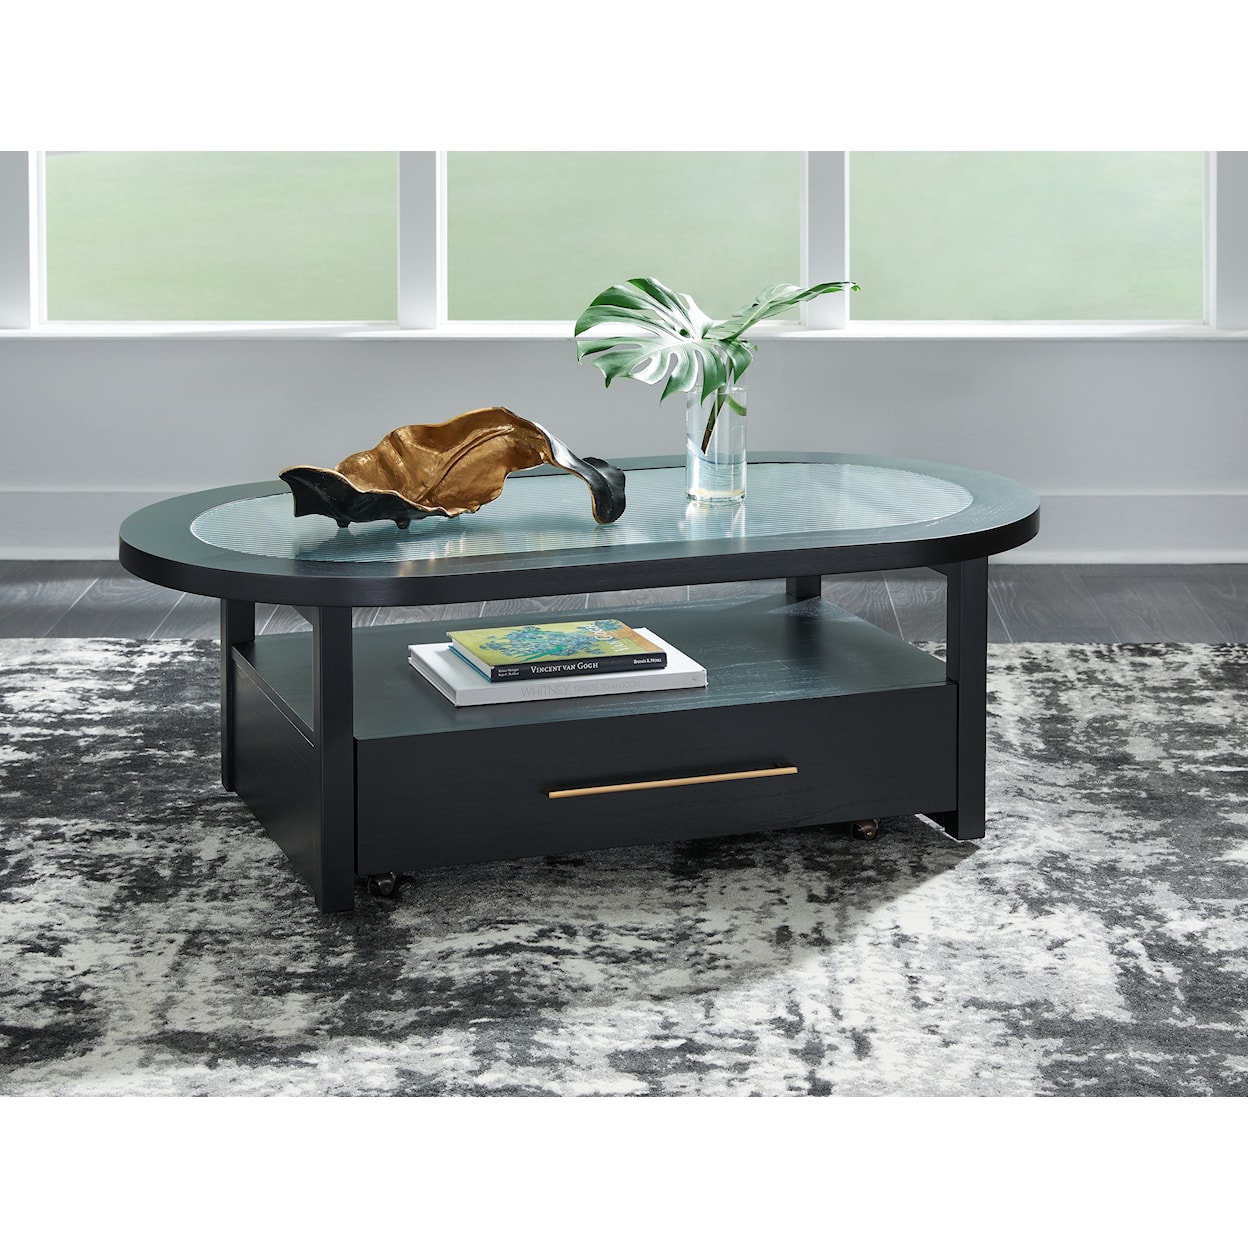 Benchcraft Winbardi Coffee Table And 2 Chairside End Tables